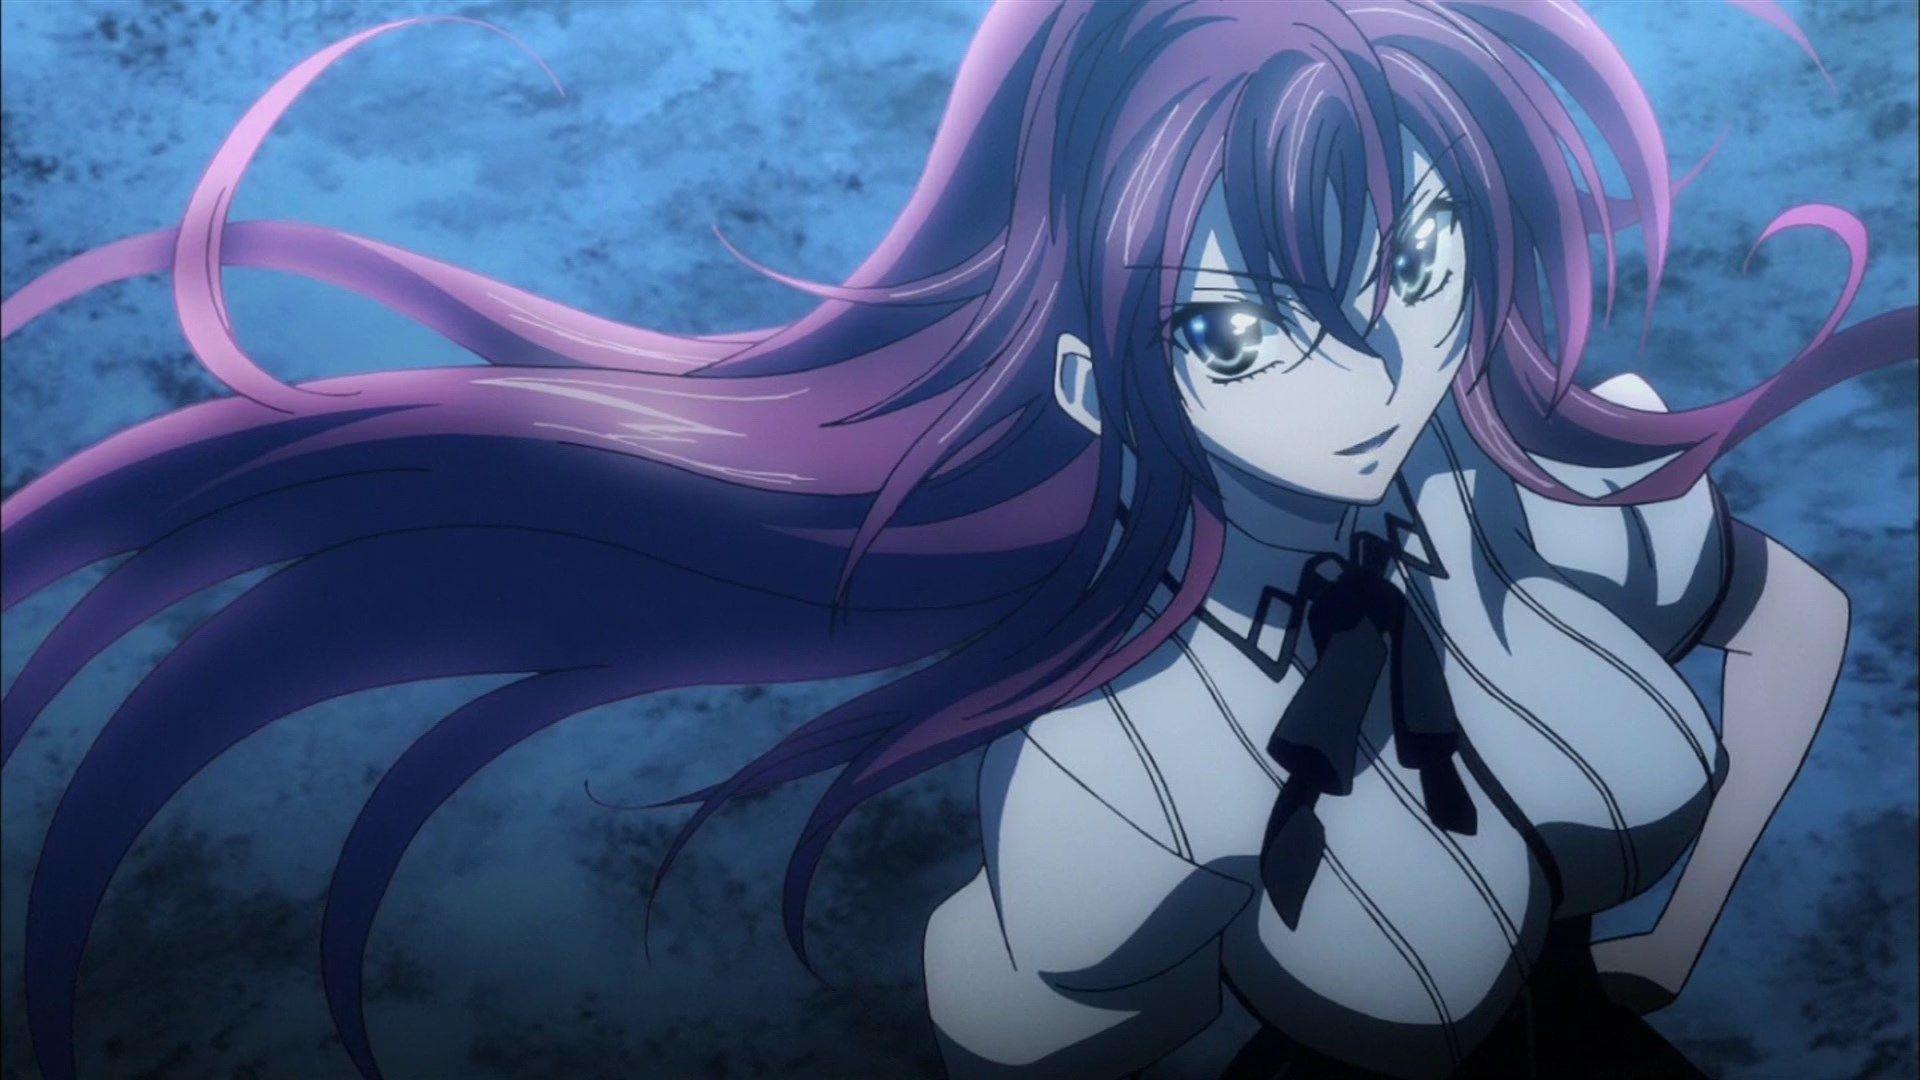 Rias Gremory in Action. High School DxD